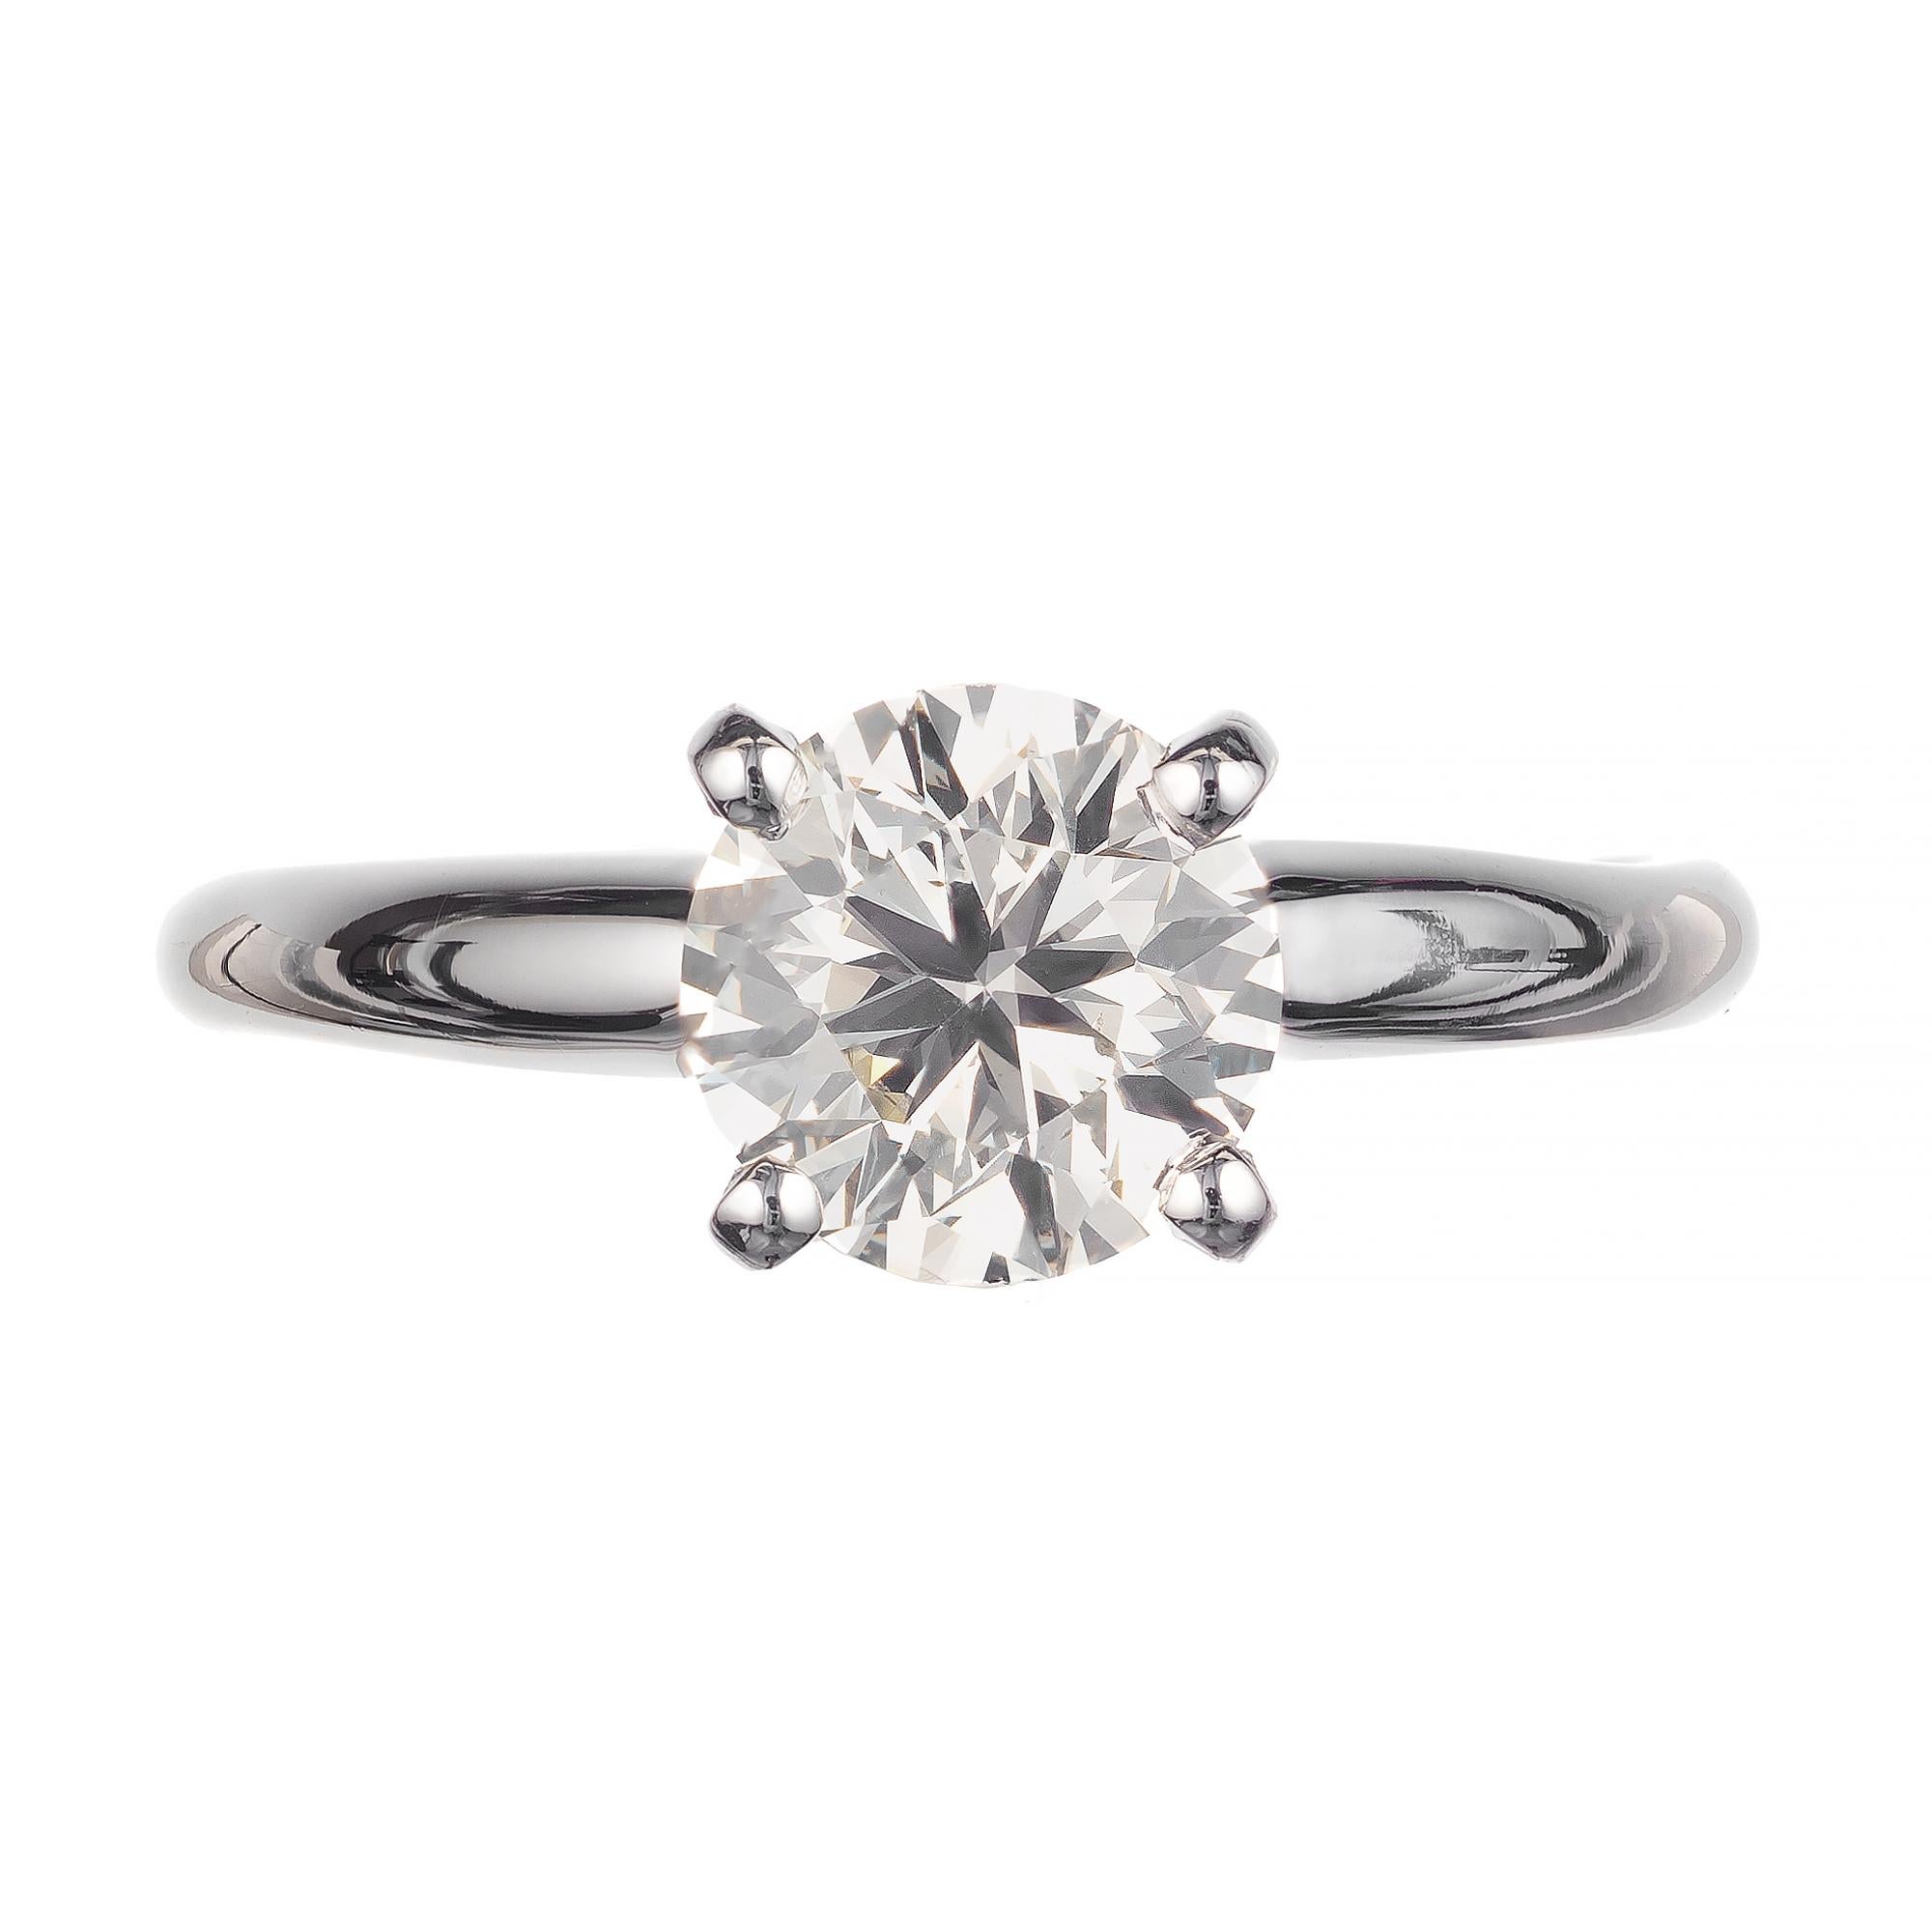 Diamond solitaire old European cut round brilliant diamond engagement ring. The center round stone is GIA certified set in a simple platinum setting created by the Peter Suchy Workshop.

1 Old European cut round brilliant cut M-I1diamond,